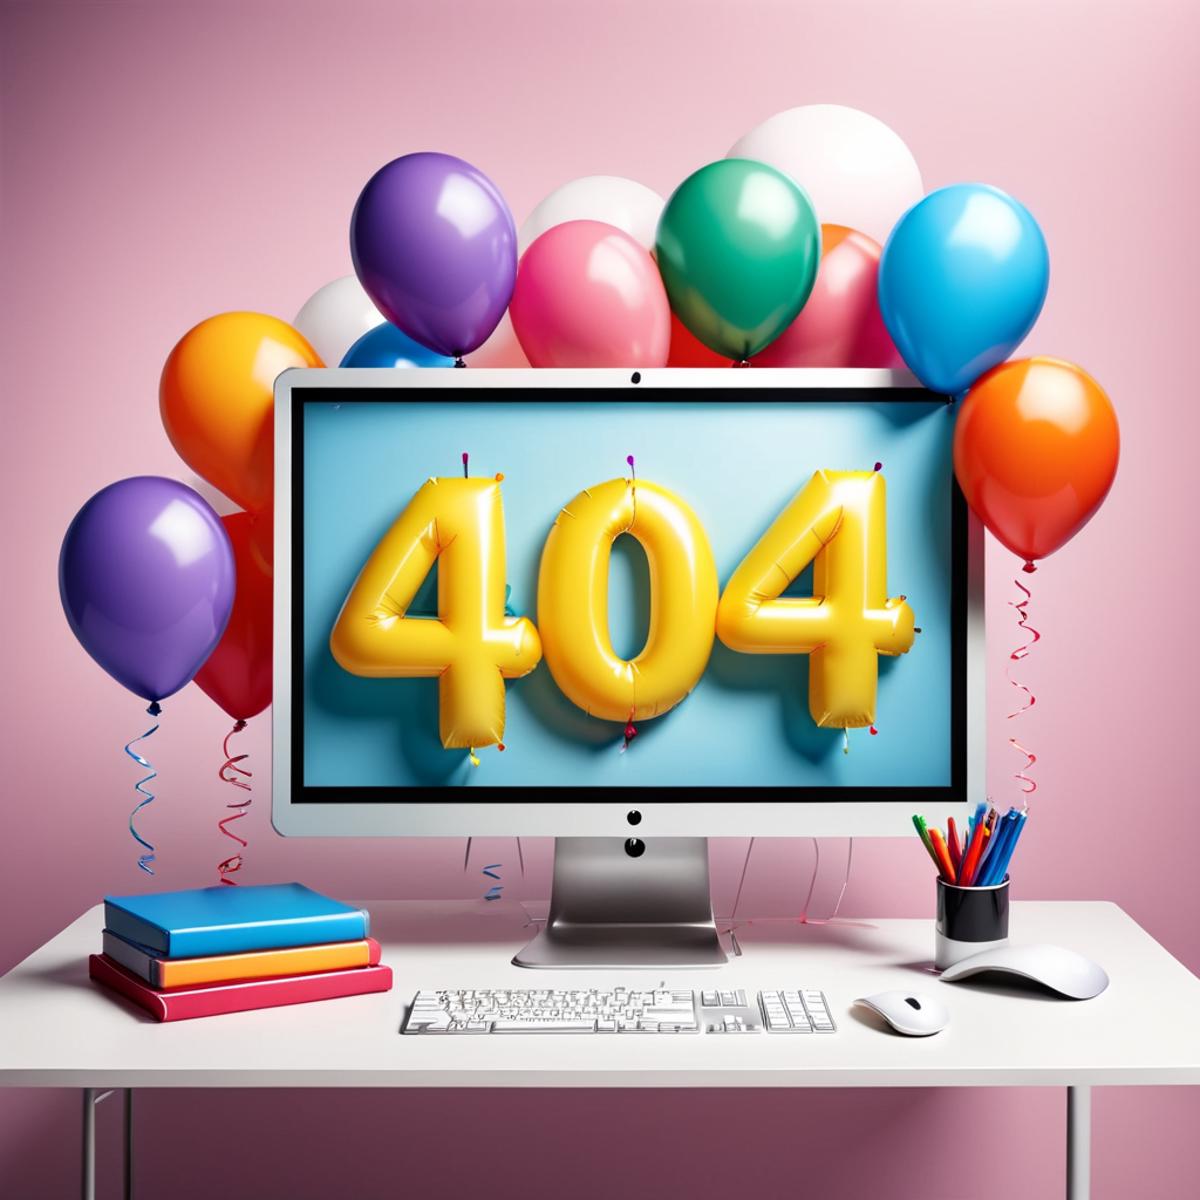 The 404ra - add-on for Harrlogos! image by RalFinger